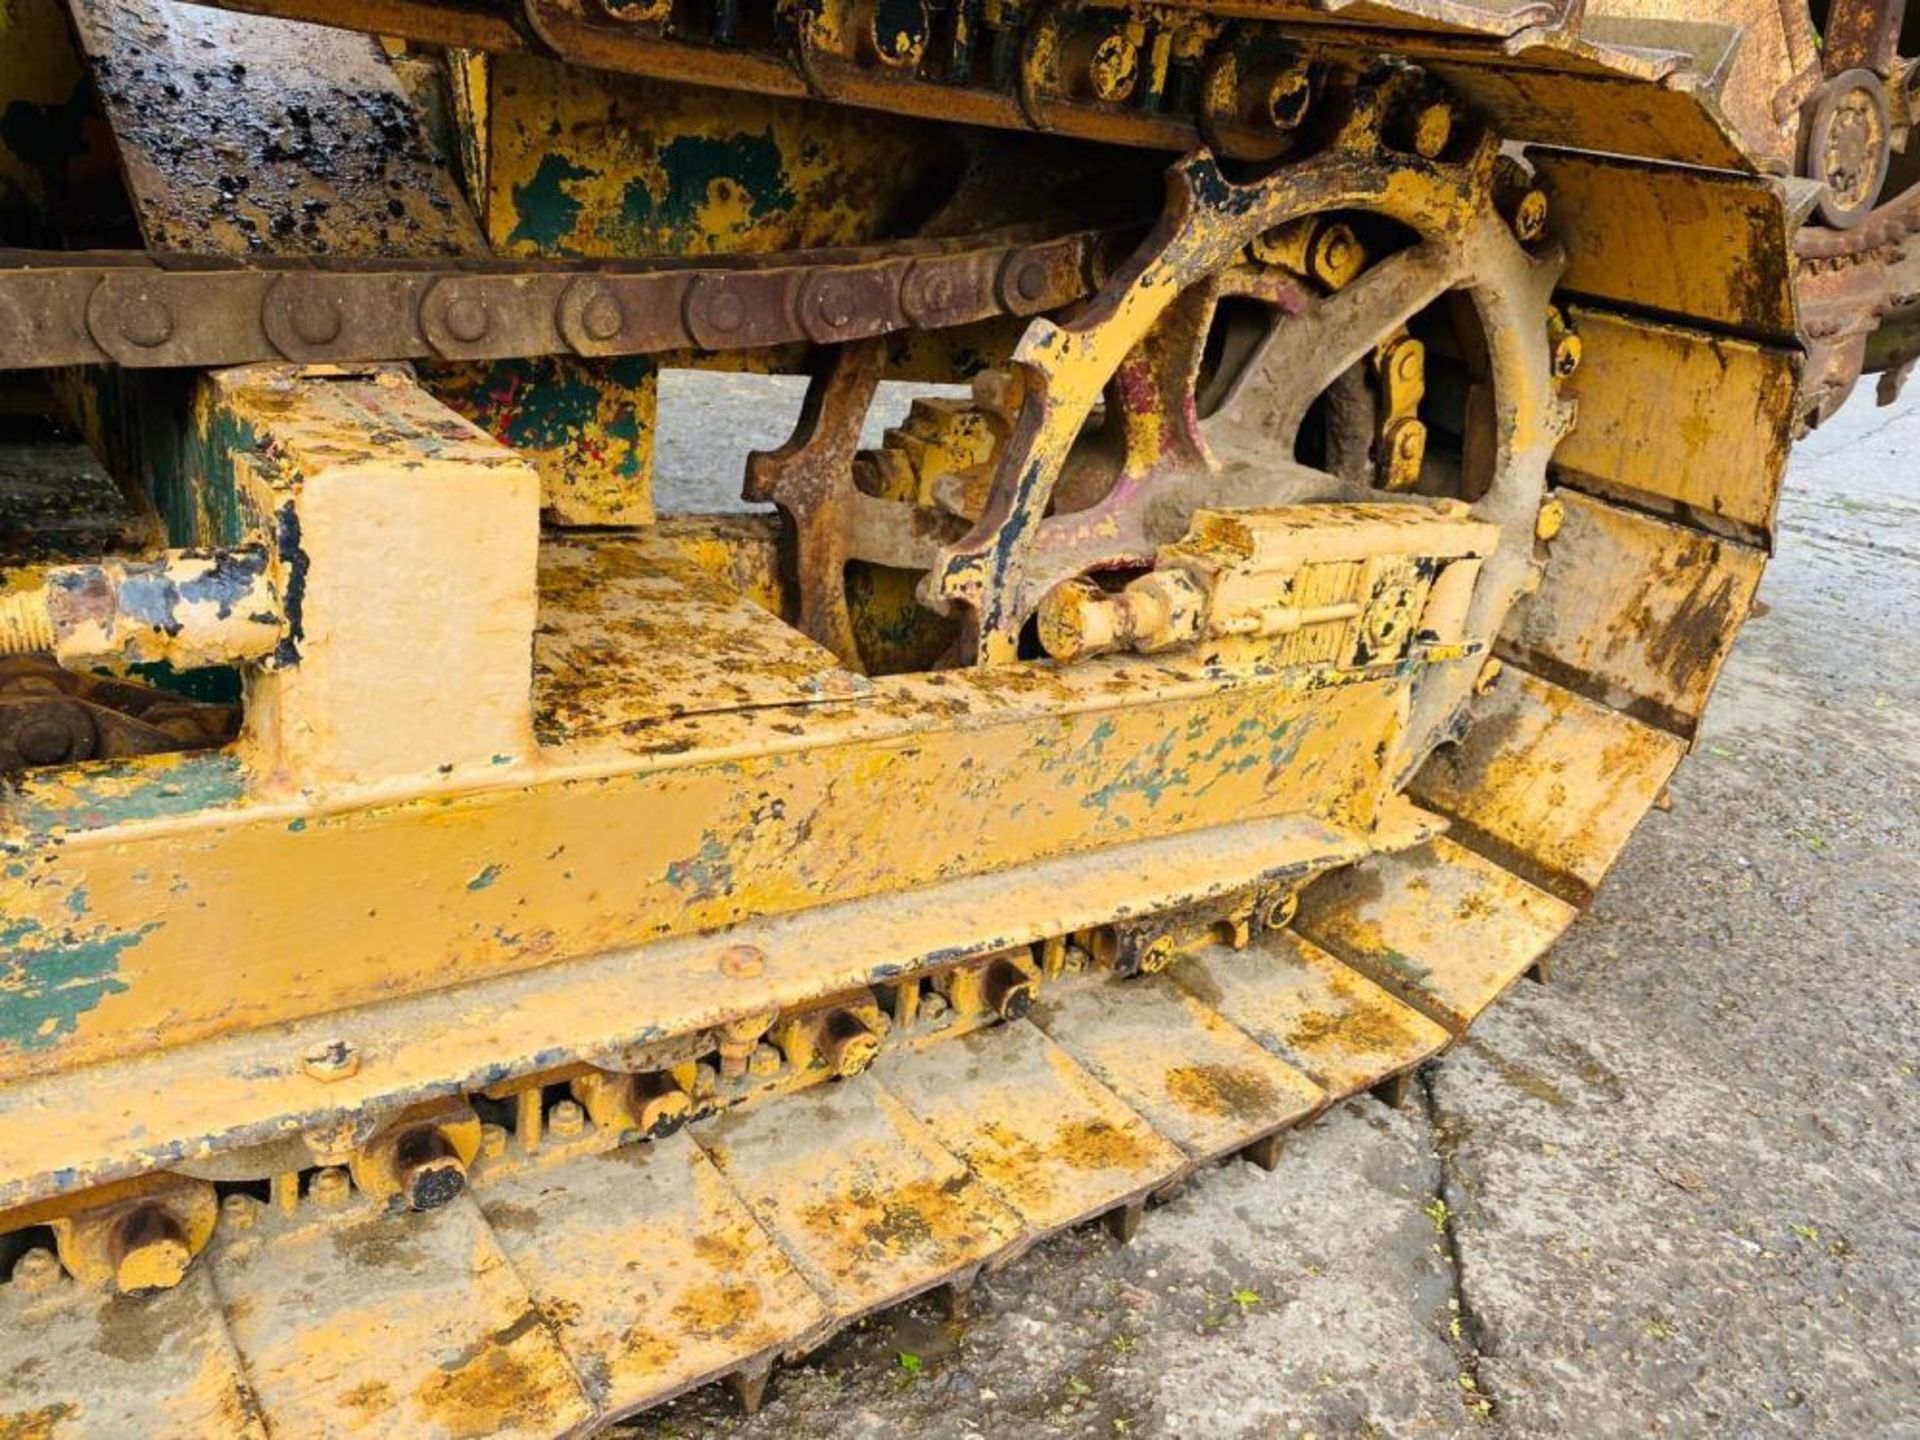 CLEVELAND 320 32" BUCKET WHEEL TRACKED TRENCHER - Image 10 of 15